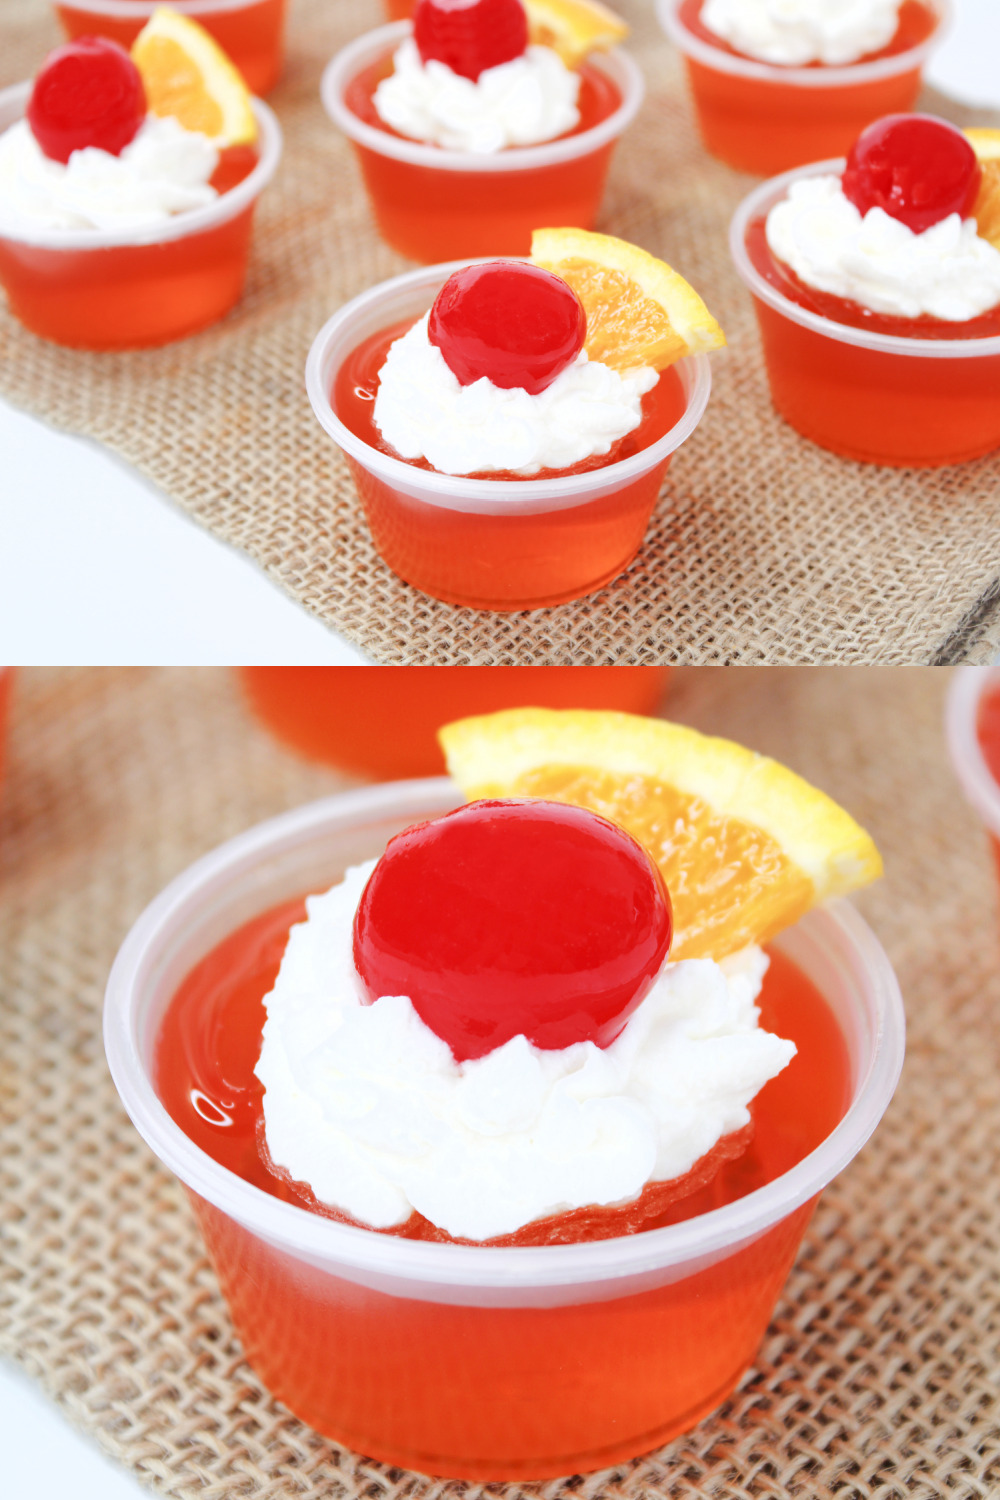 Orange jello shots - sex on the beach jello shots garnished with whipped cream, a cherry and orange wedge on a burlap background.